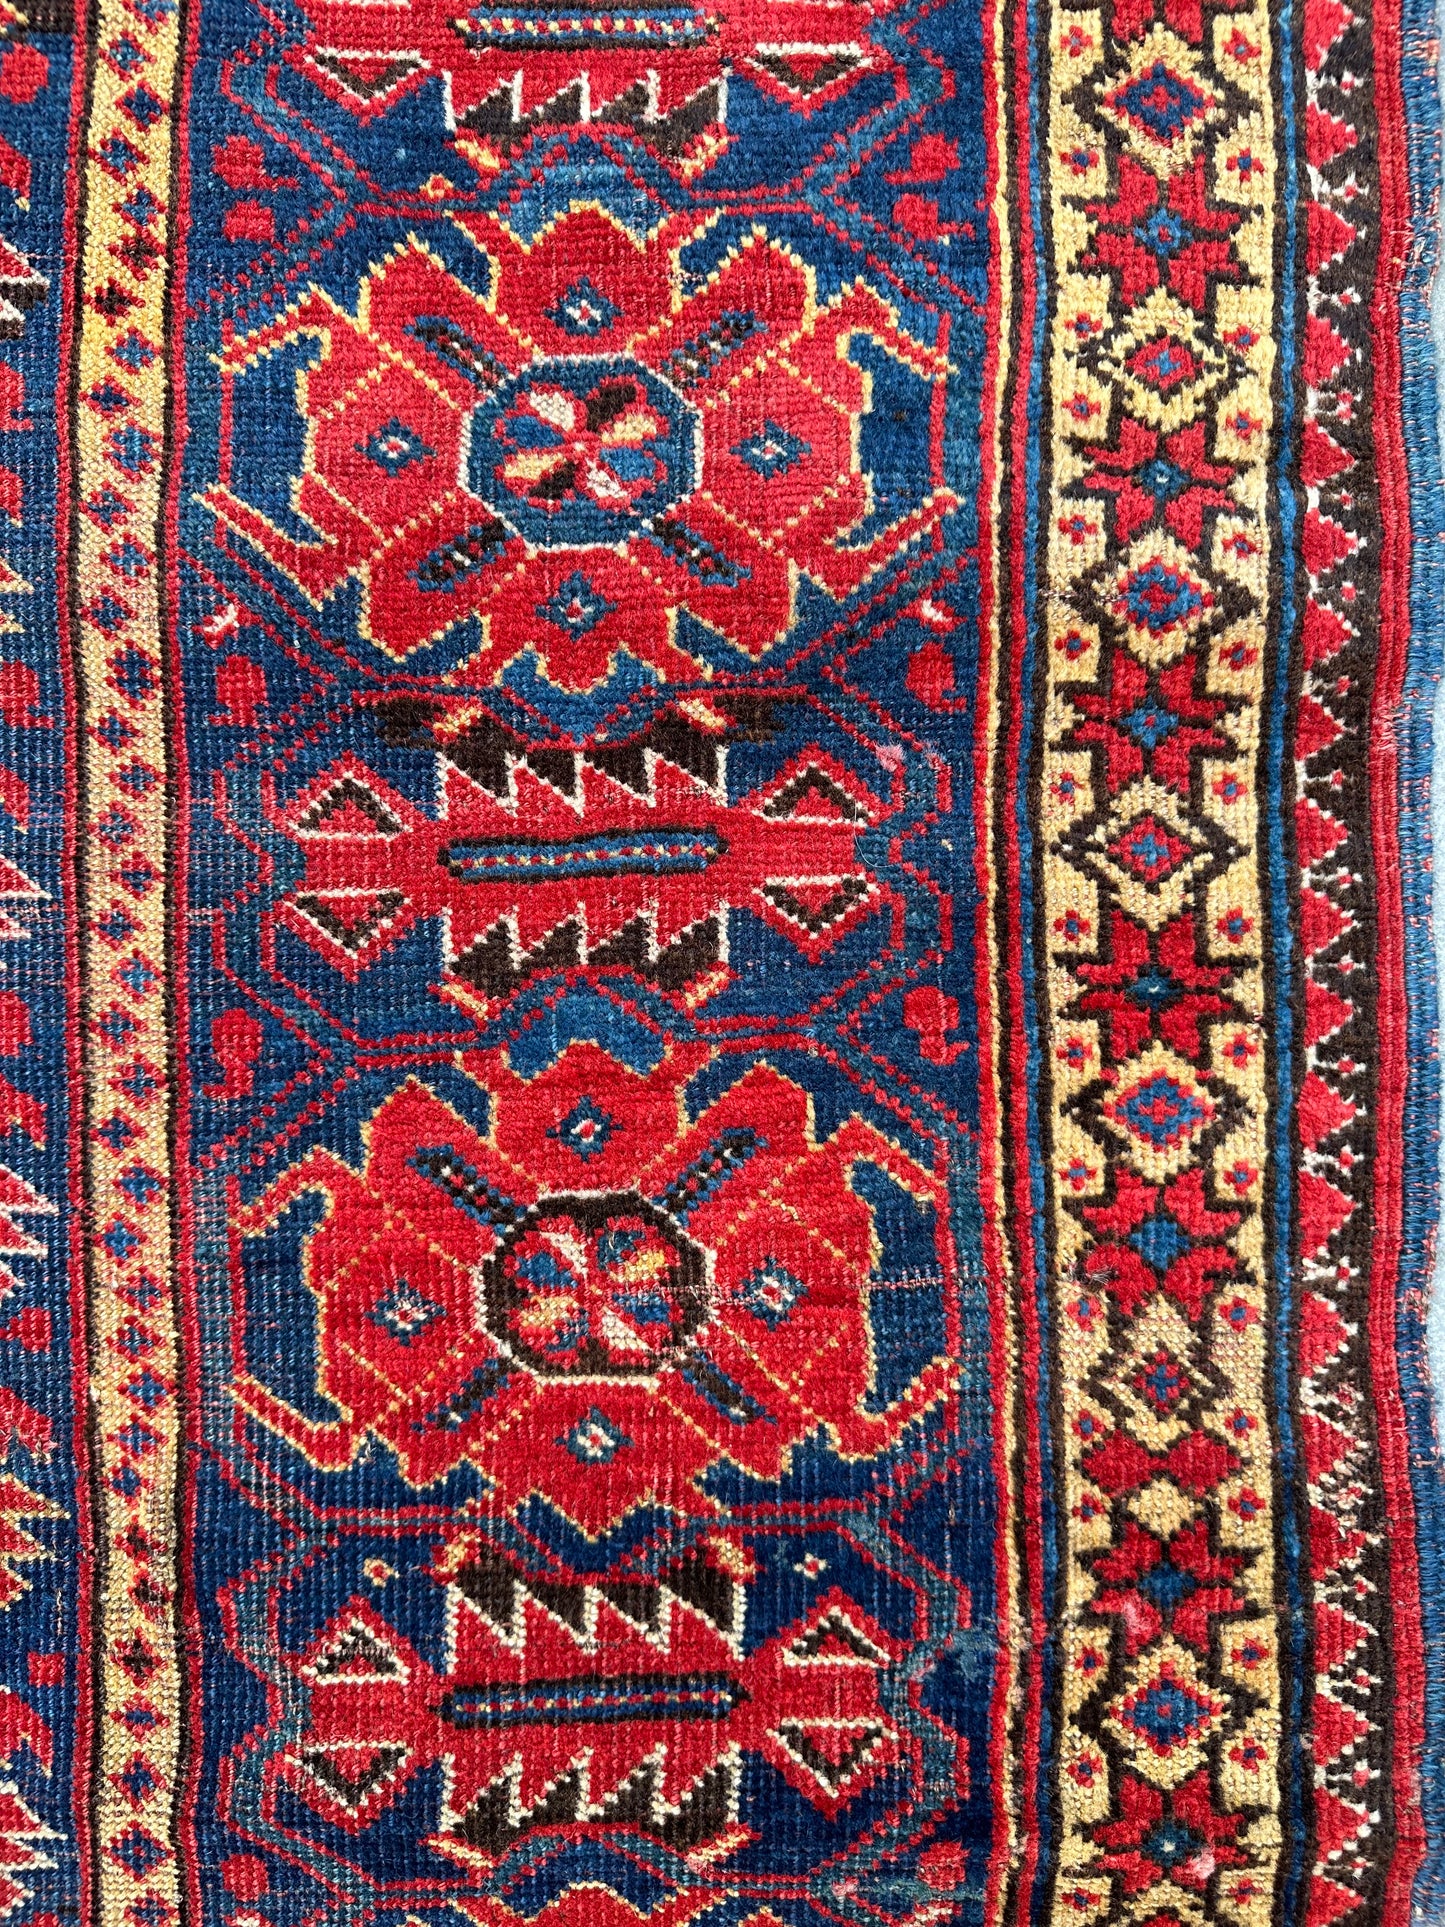 5'x9' Red and Blue Antique Collectable North Afghanistan Bashir Rug